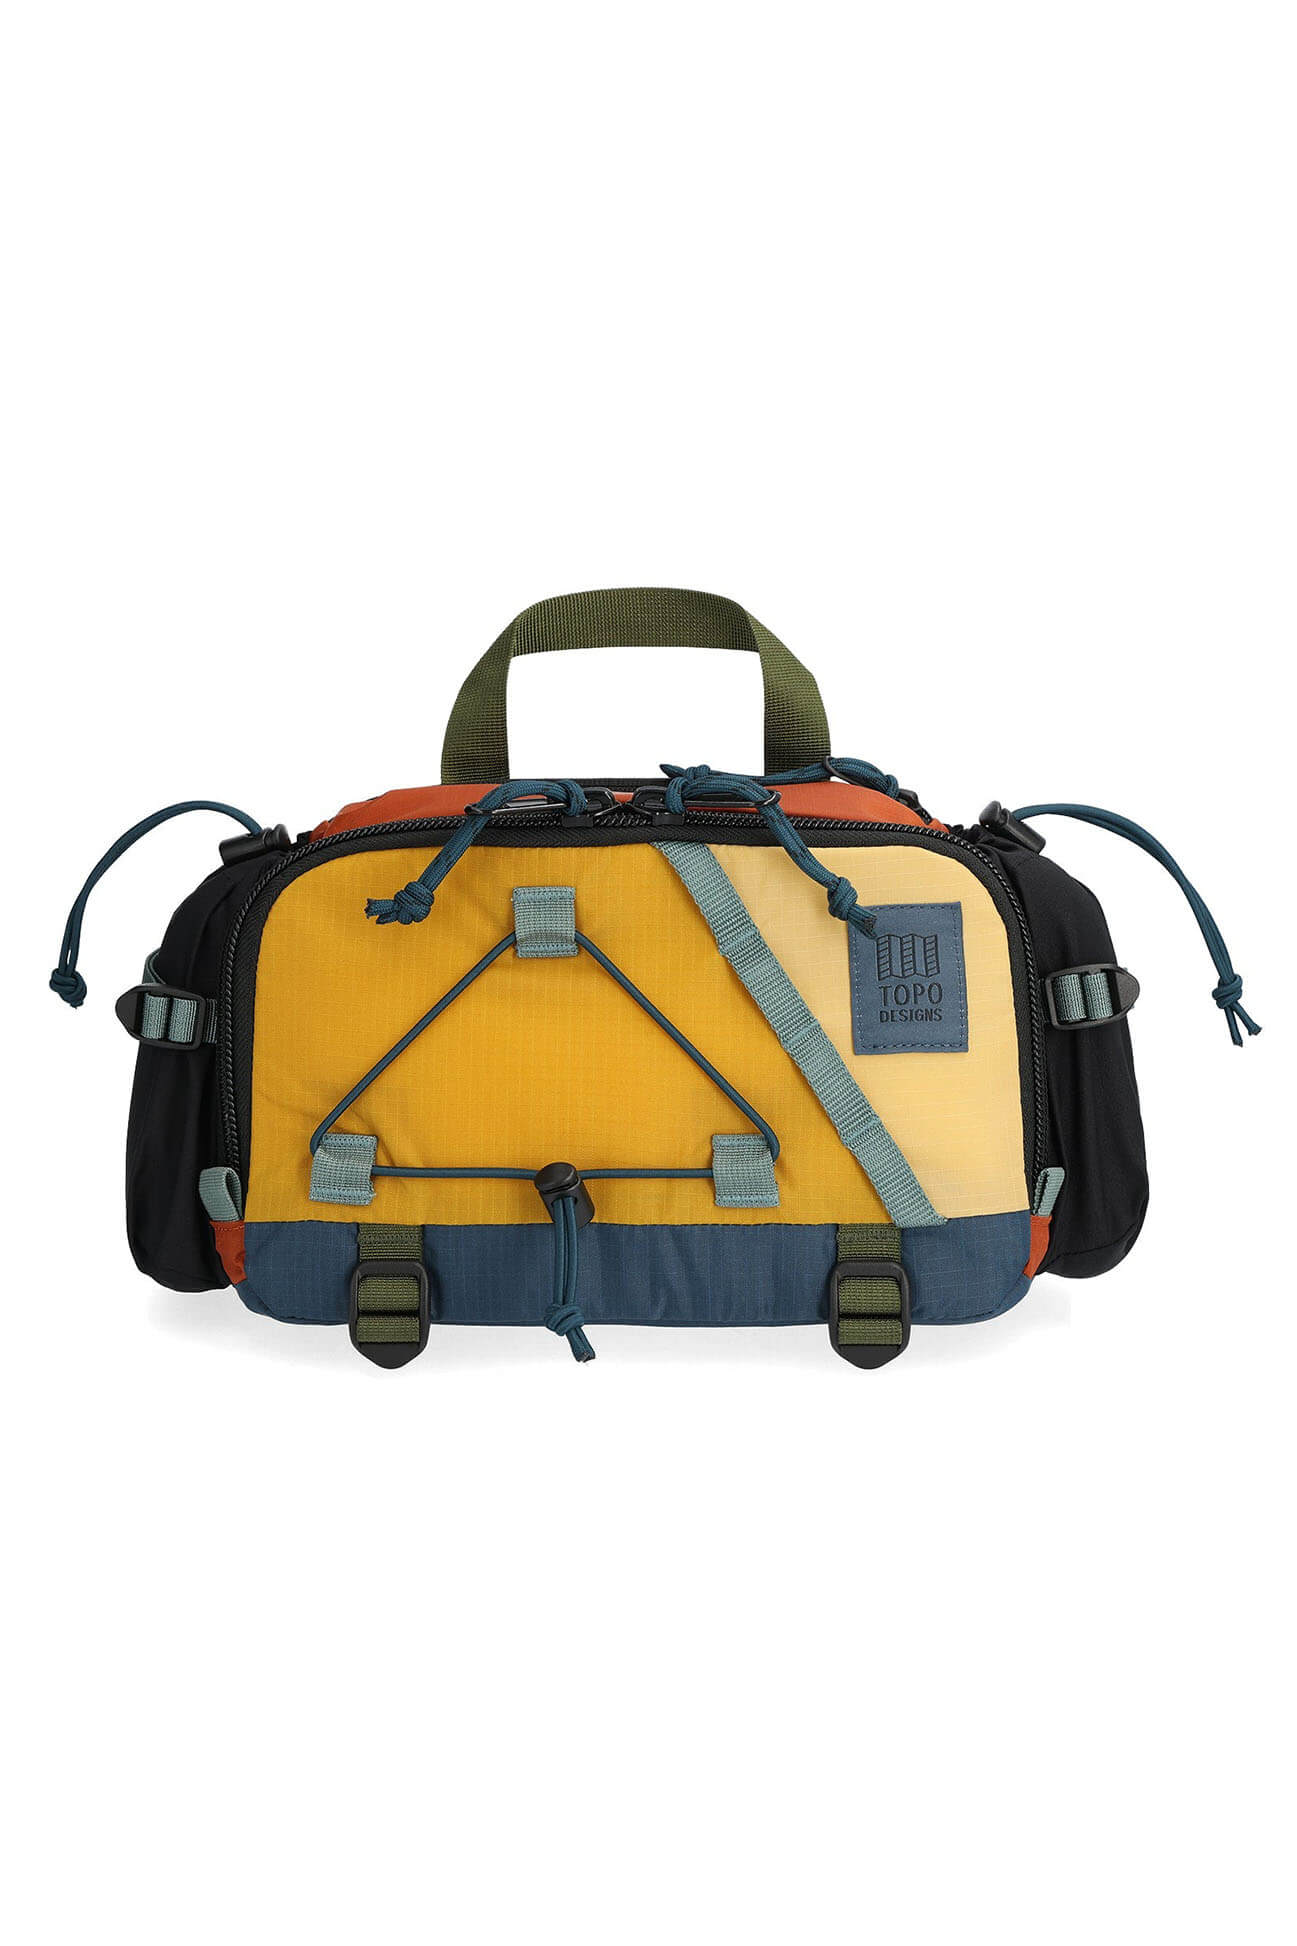 Topo Designs mountain hydro hip pack in mustard and clay